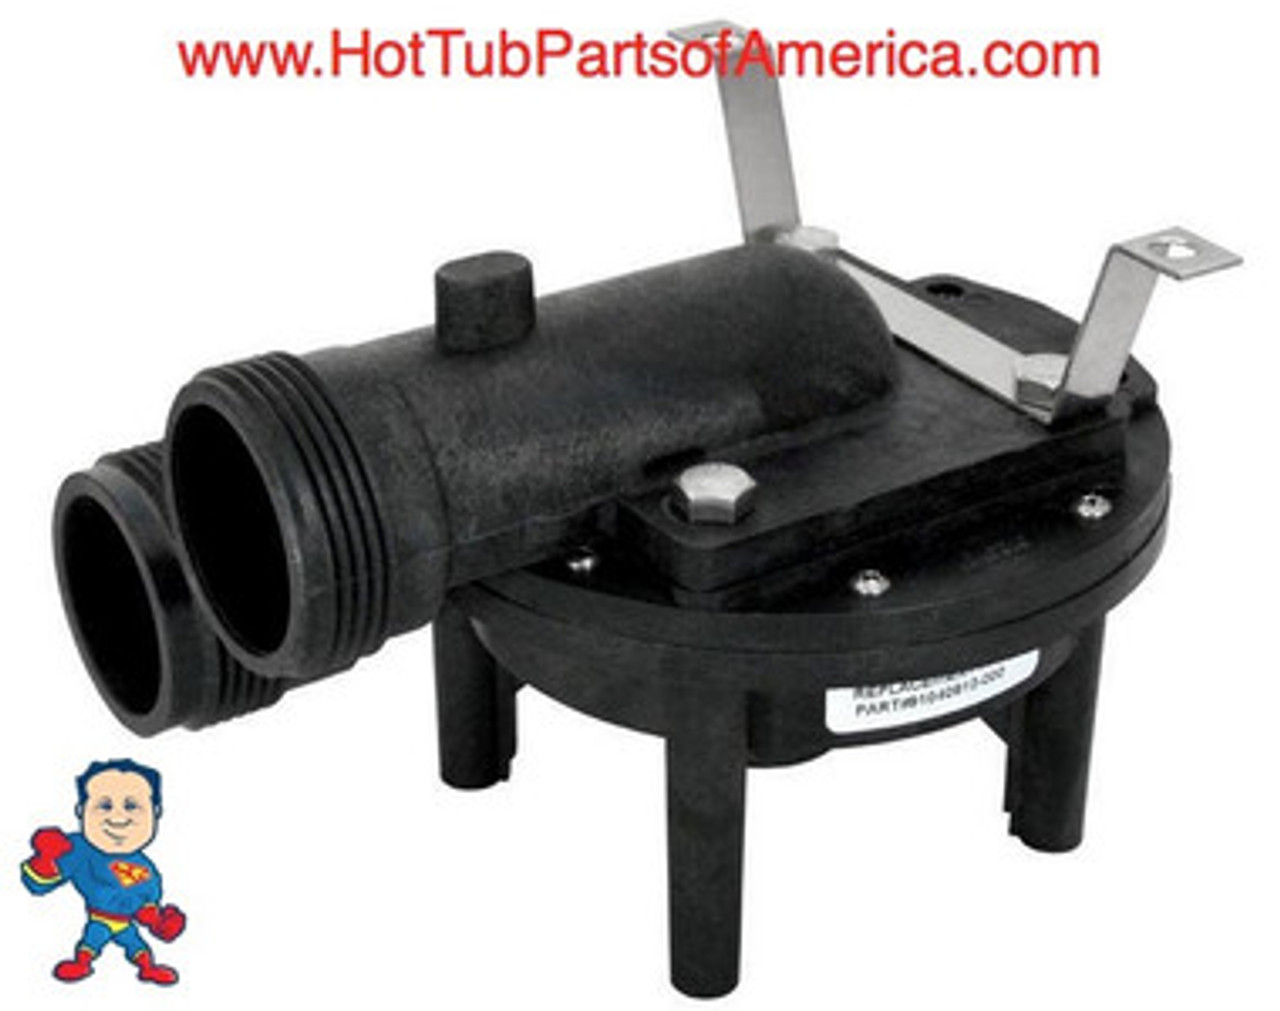 Wet End, Aqua-Flo, FMVP, 1.0HP, 1-1/2", 48 frame, 10-11A/115v Verticle Mount Pump
The Suction and Pressure sides both Measure about 2-3/8" Across the threads and is called 1 ½”!
Also the suction side of this wet end can be used in any position you simply unscrew the four bolts in the front and turn it and tighten the bolts back in and you are done...